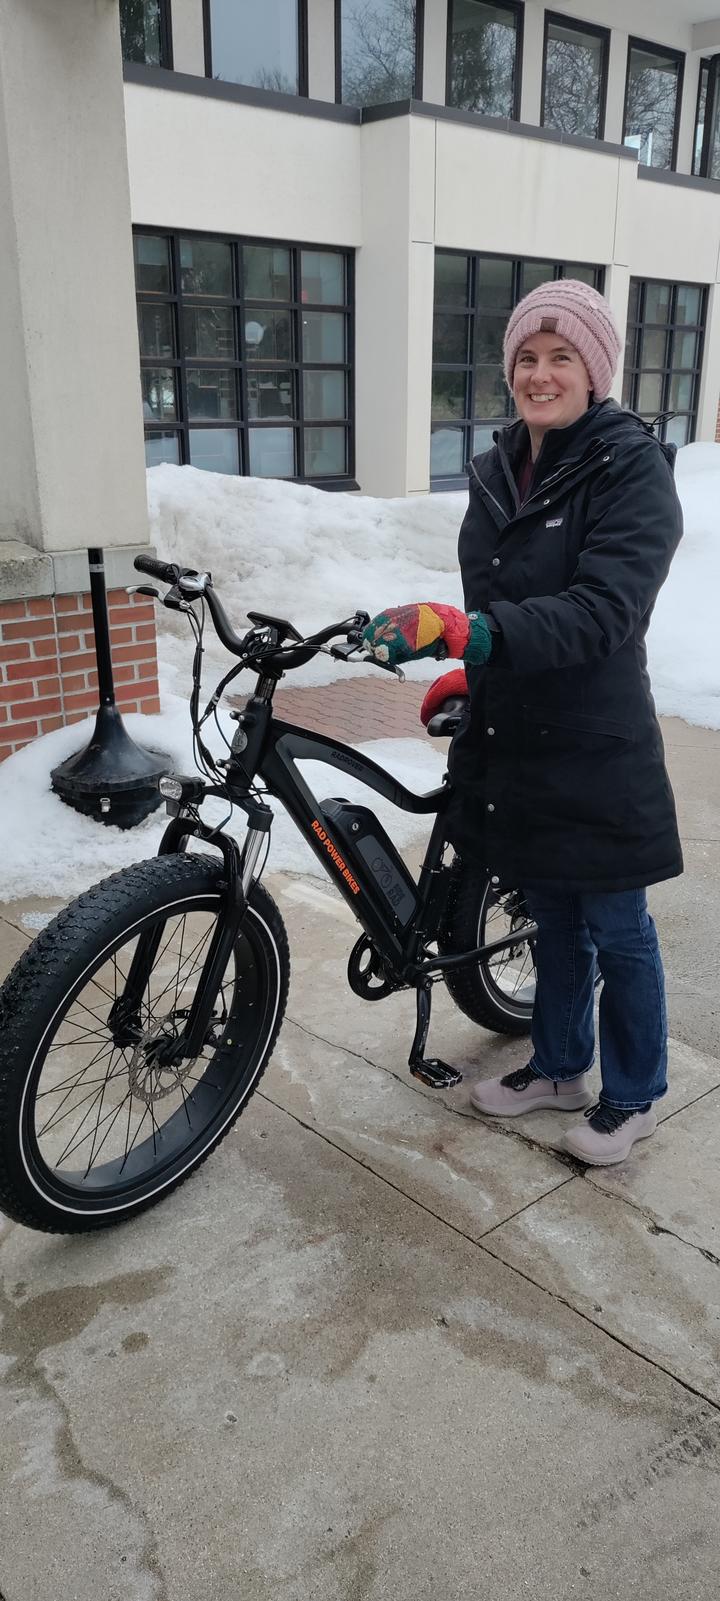 Associate Professor and Sustainability Coordinator Katy Chapman gets ready to ride an electric bike